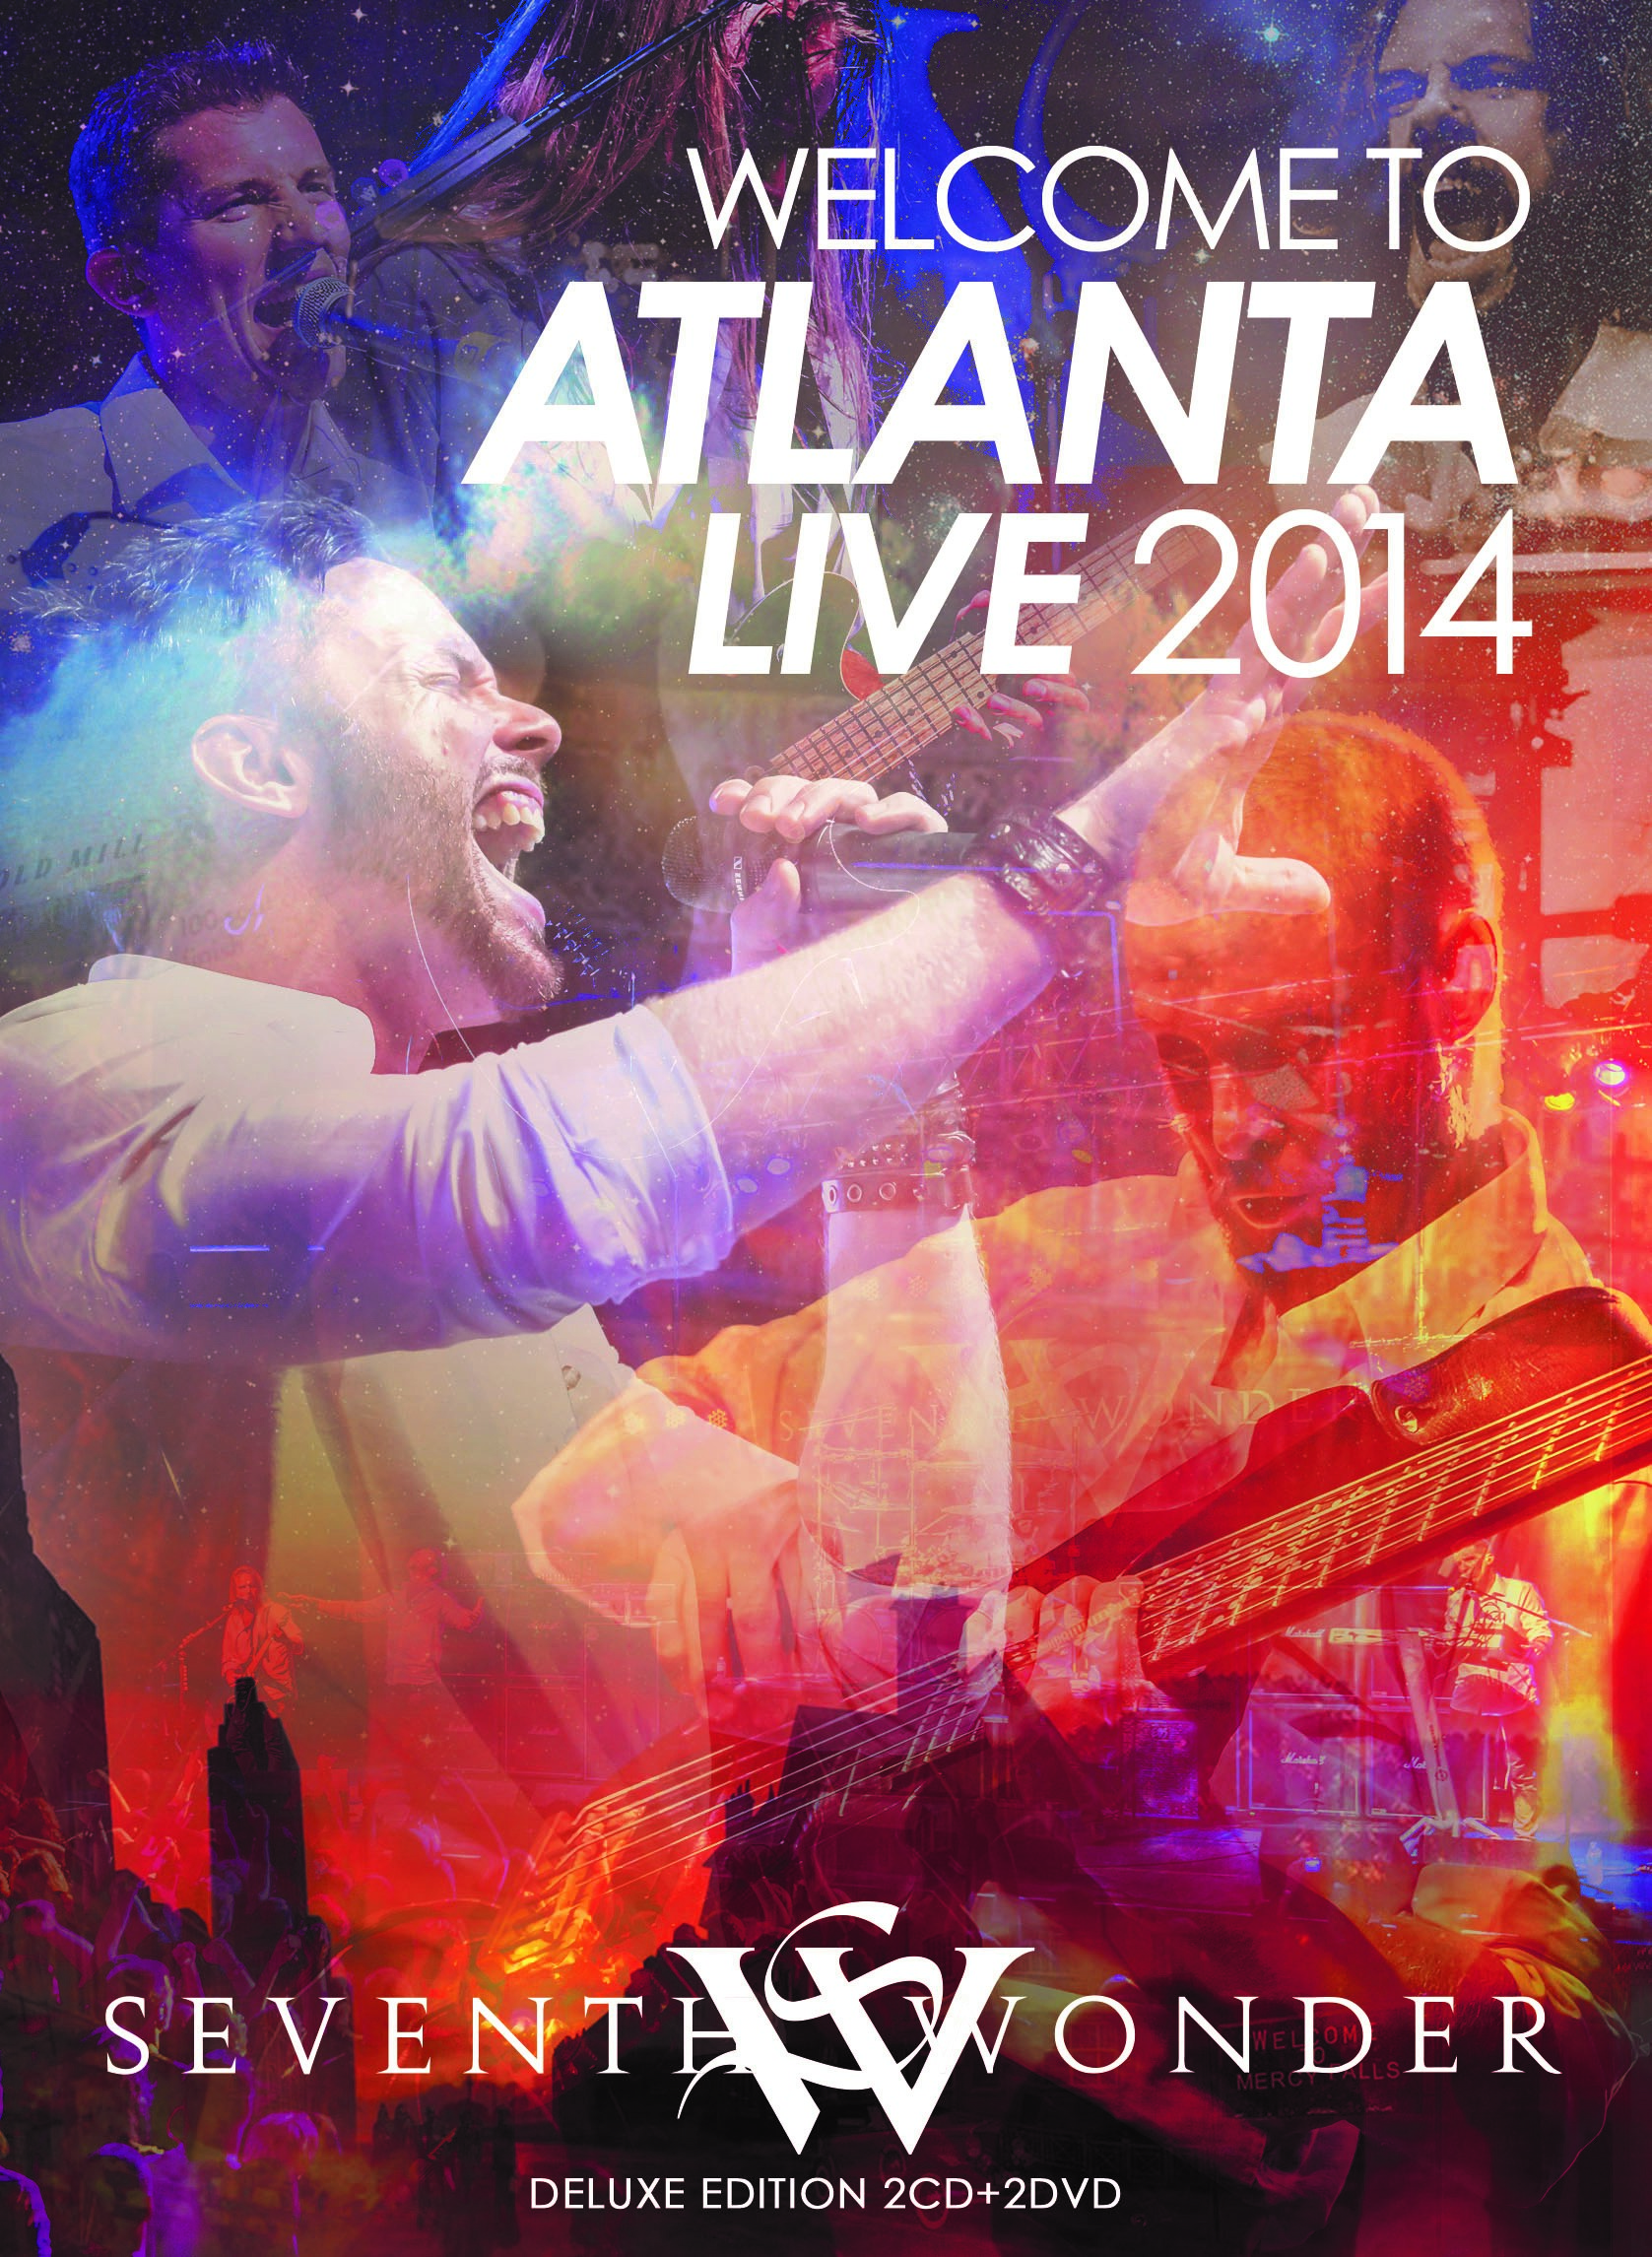 Seventh Wonder - Welcome To Atlanta Live 2014 (Deluxe Ed.)